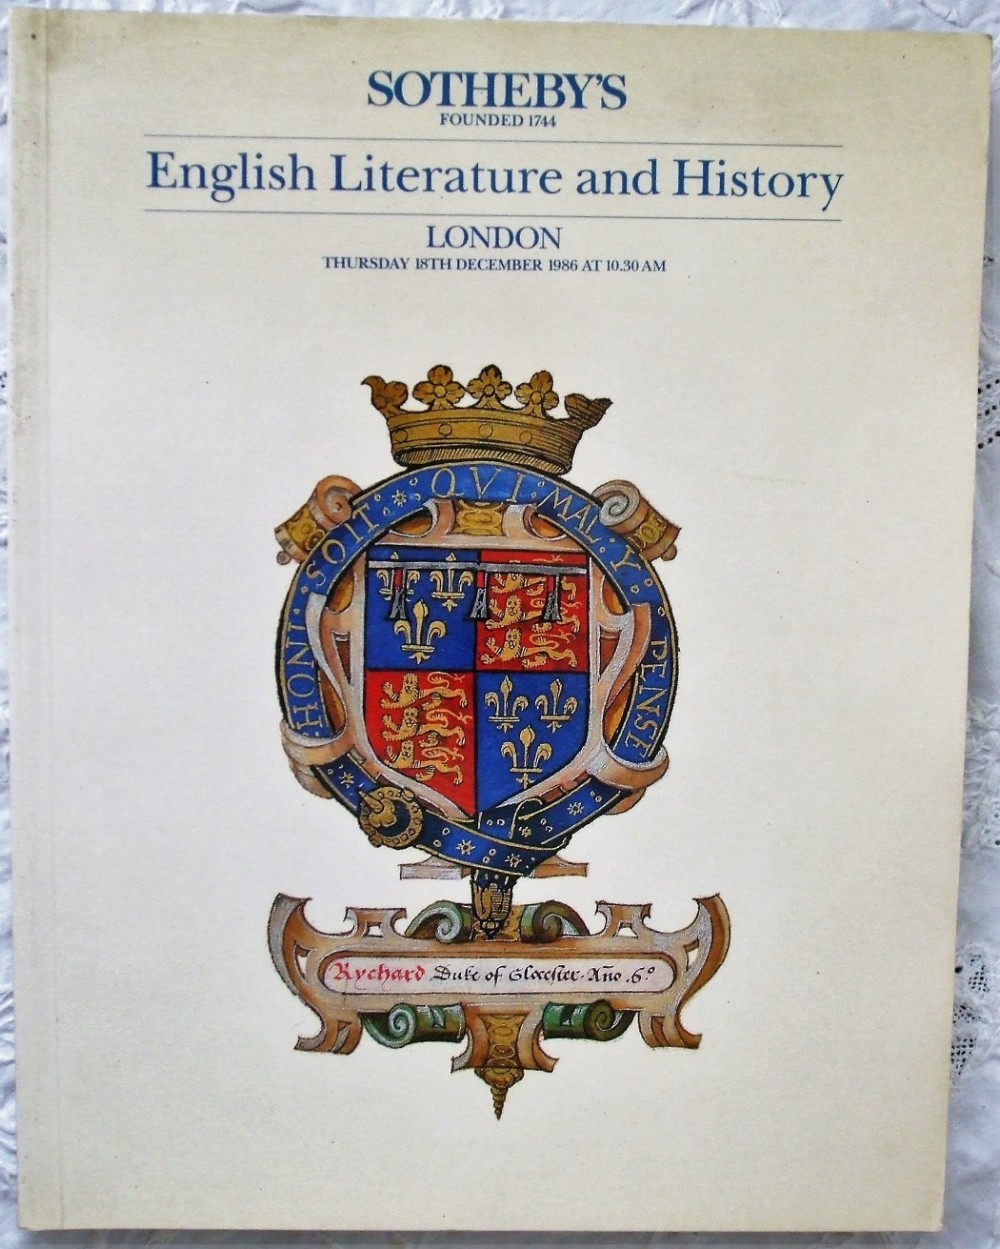 sotheby's english literature and history london 18 12 1986